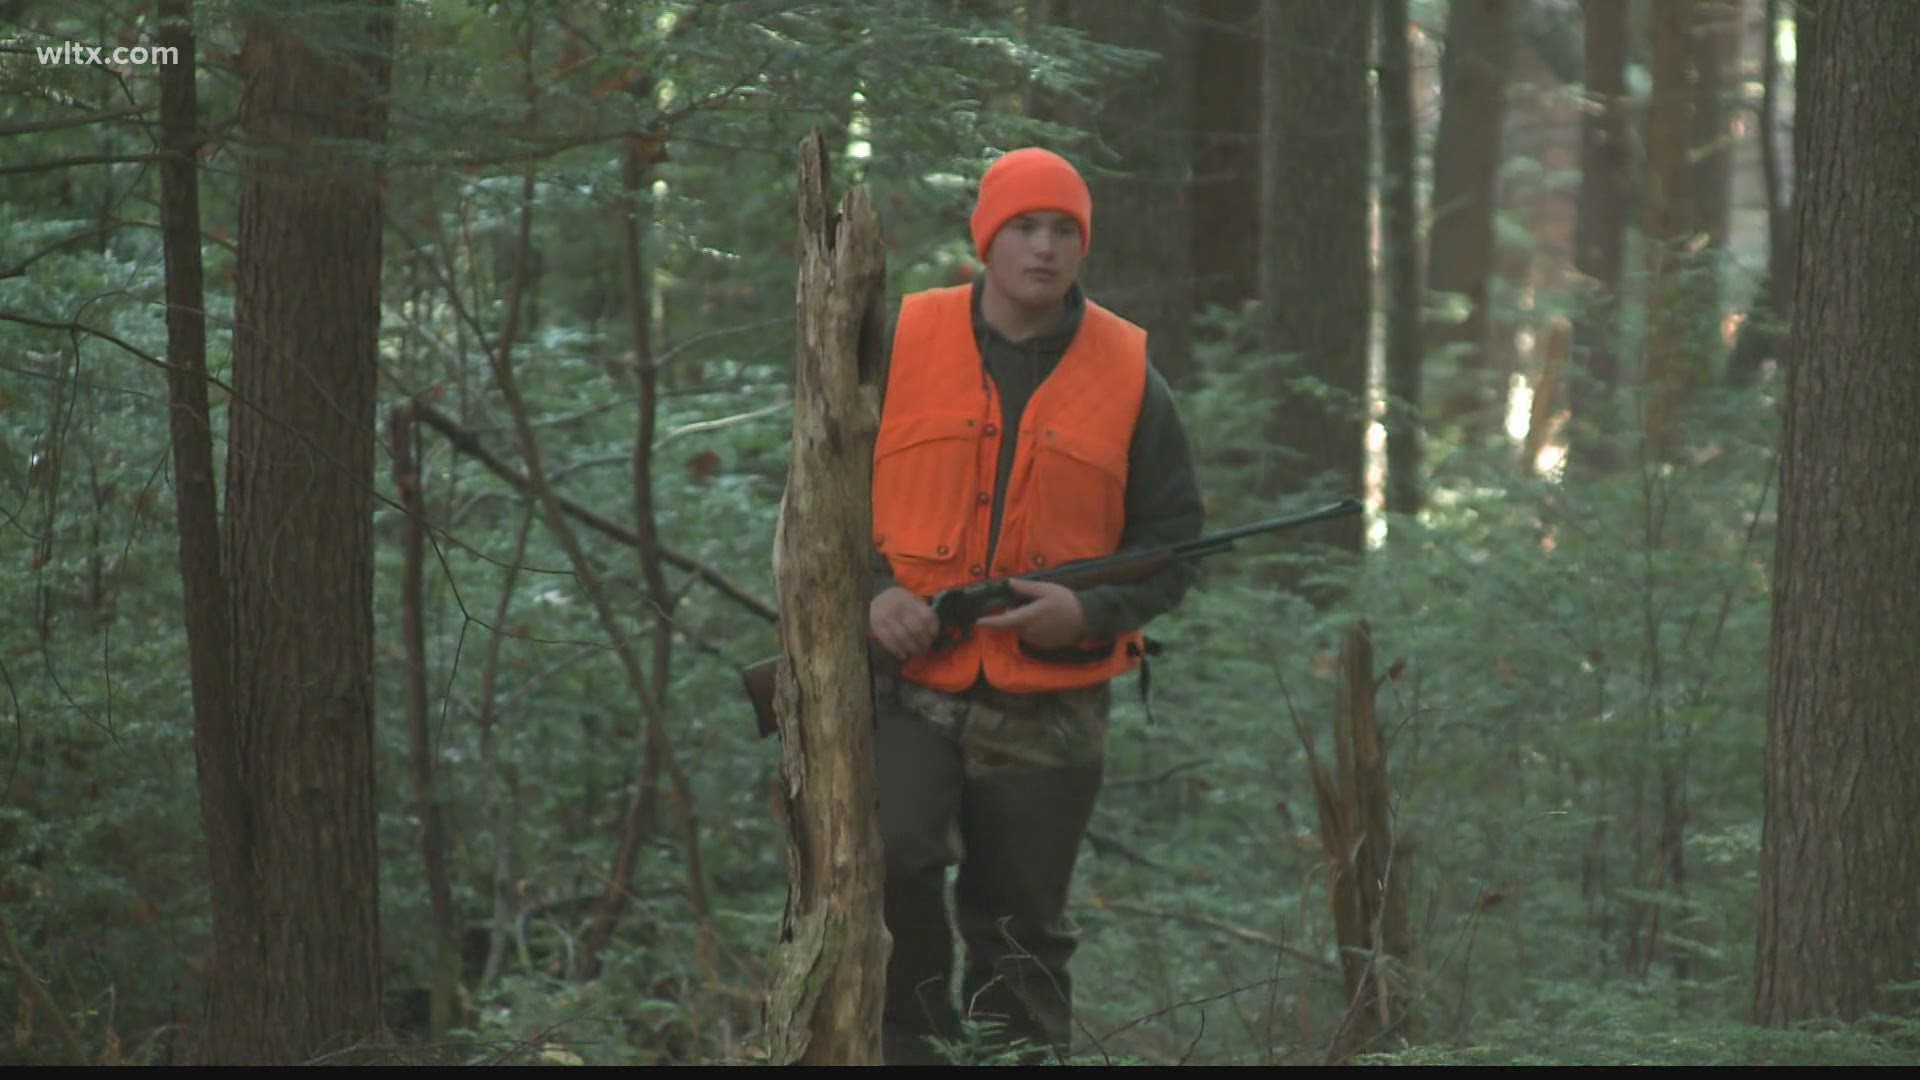 SCDNR is conducting a survey about hunting on Sundays in South Carolina.